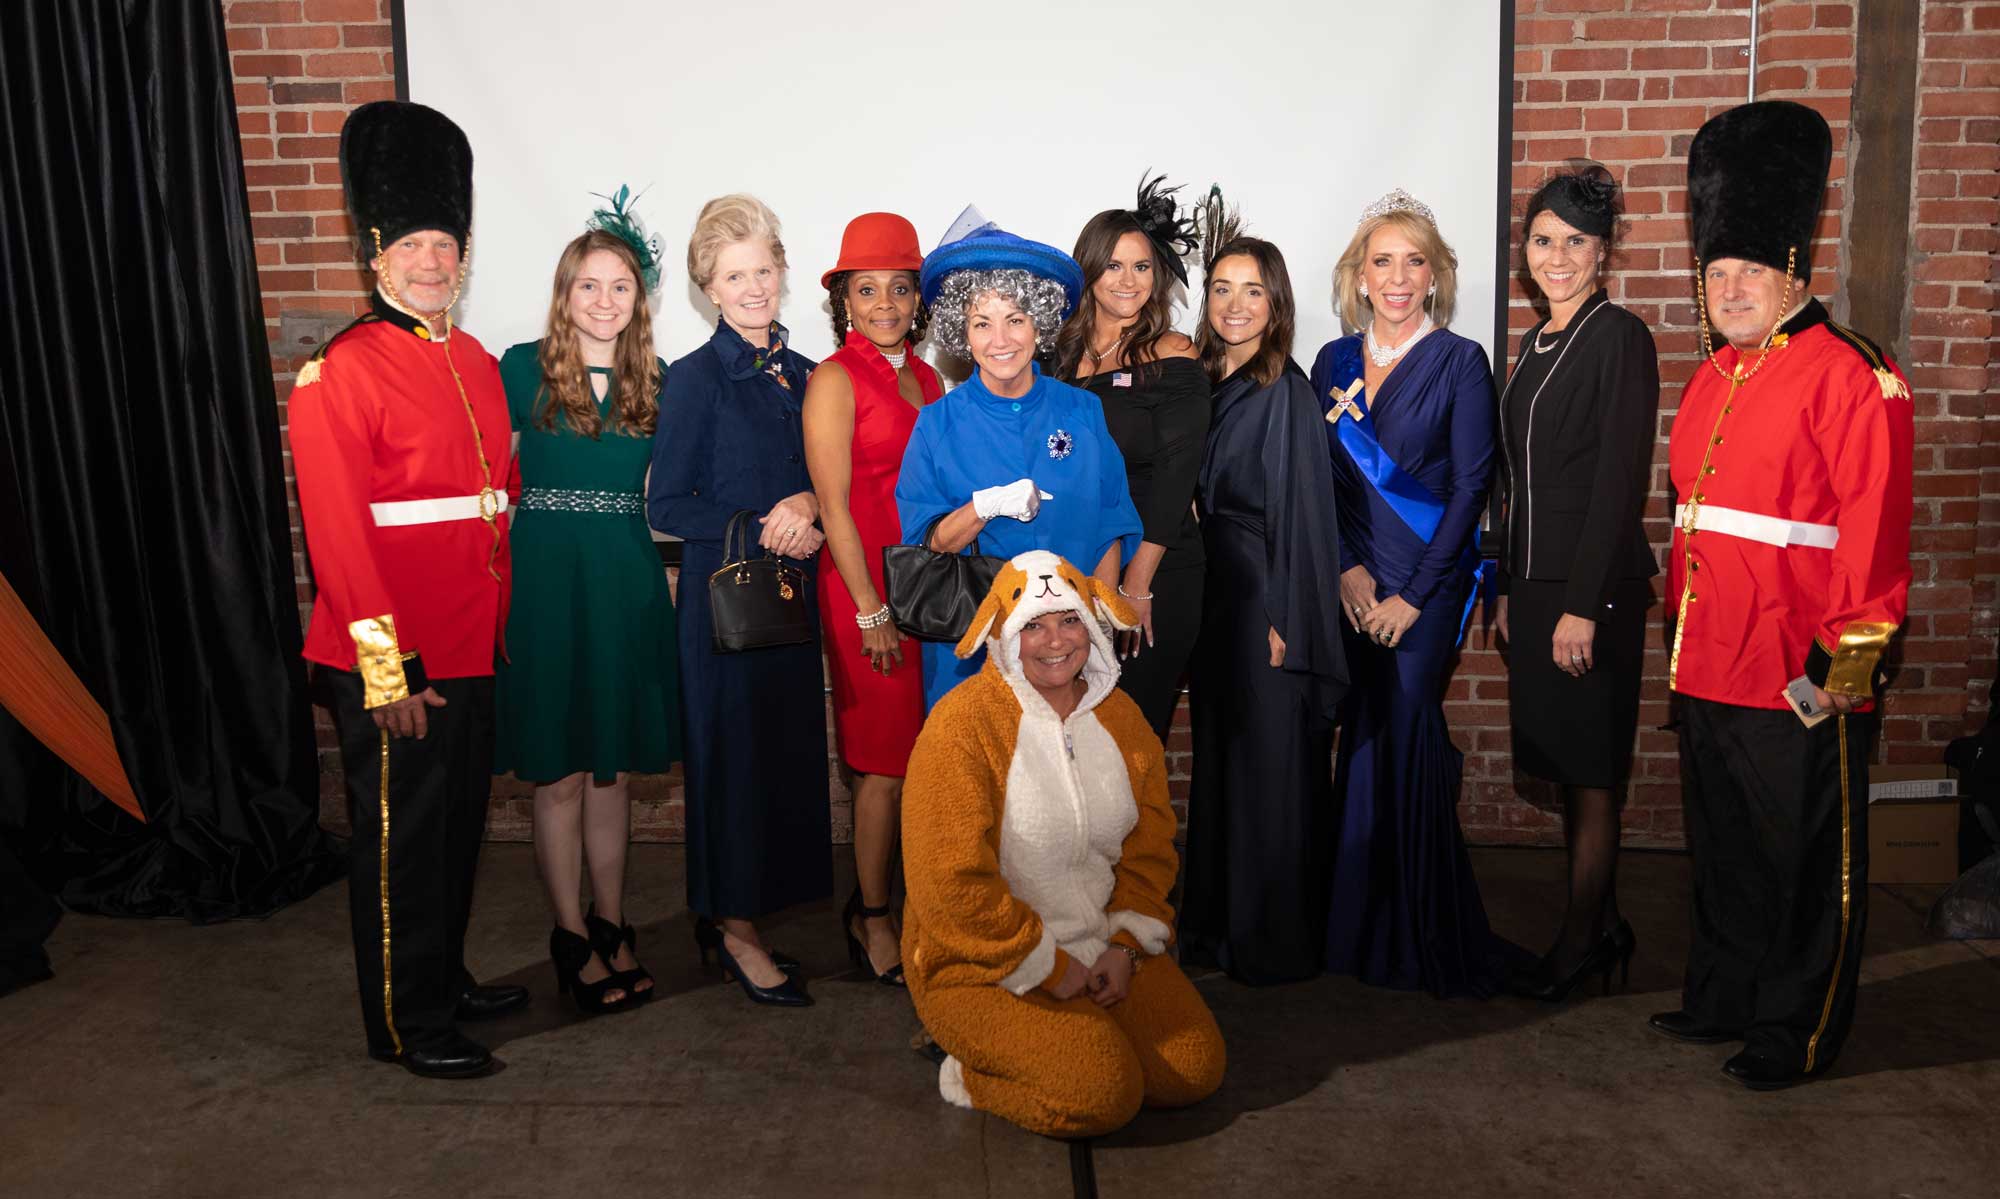 A group of people in costumes posing for a photo.